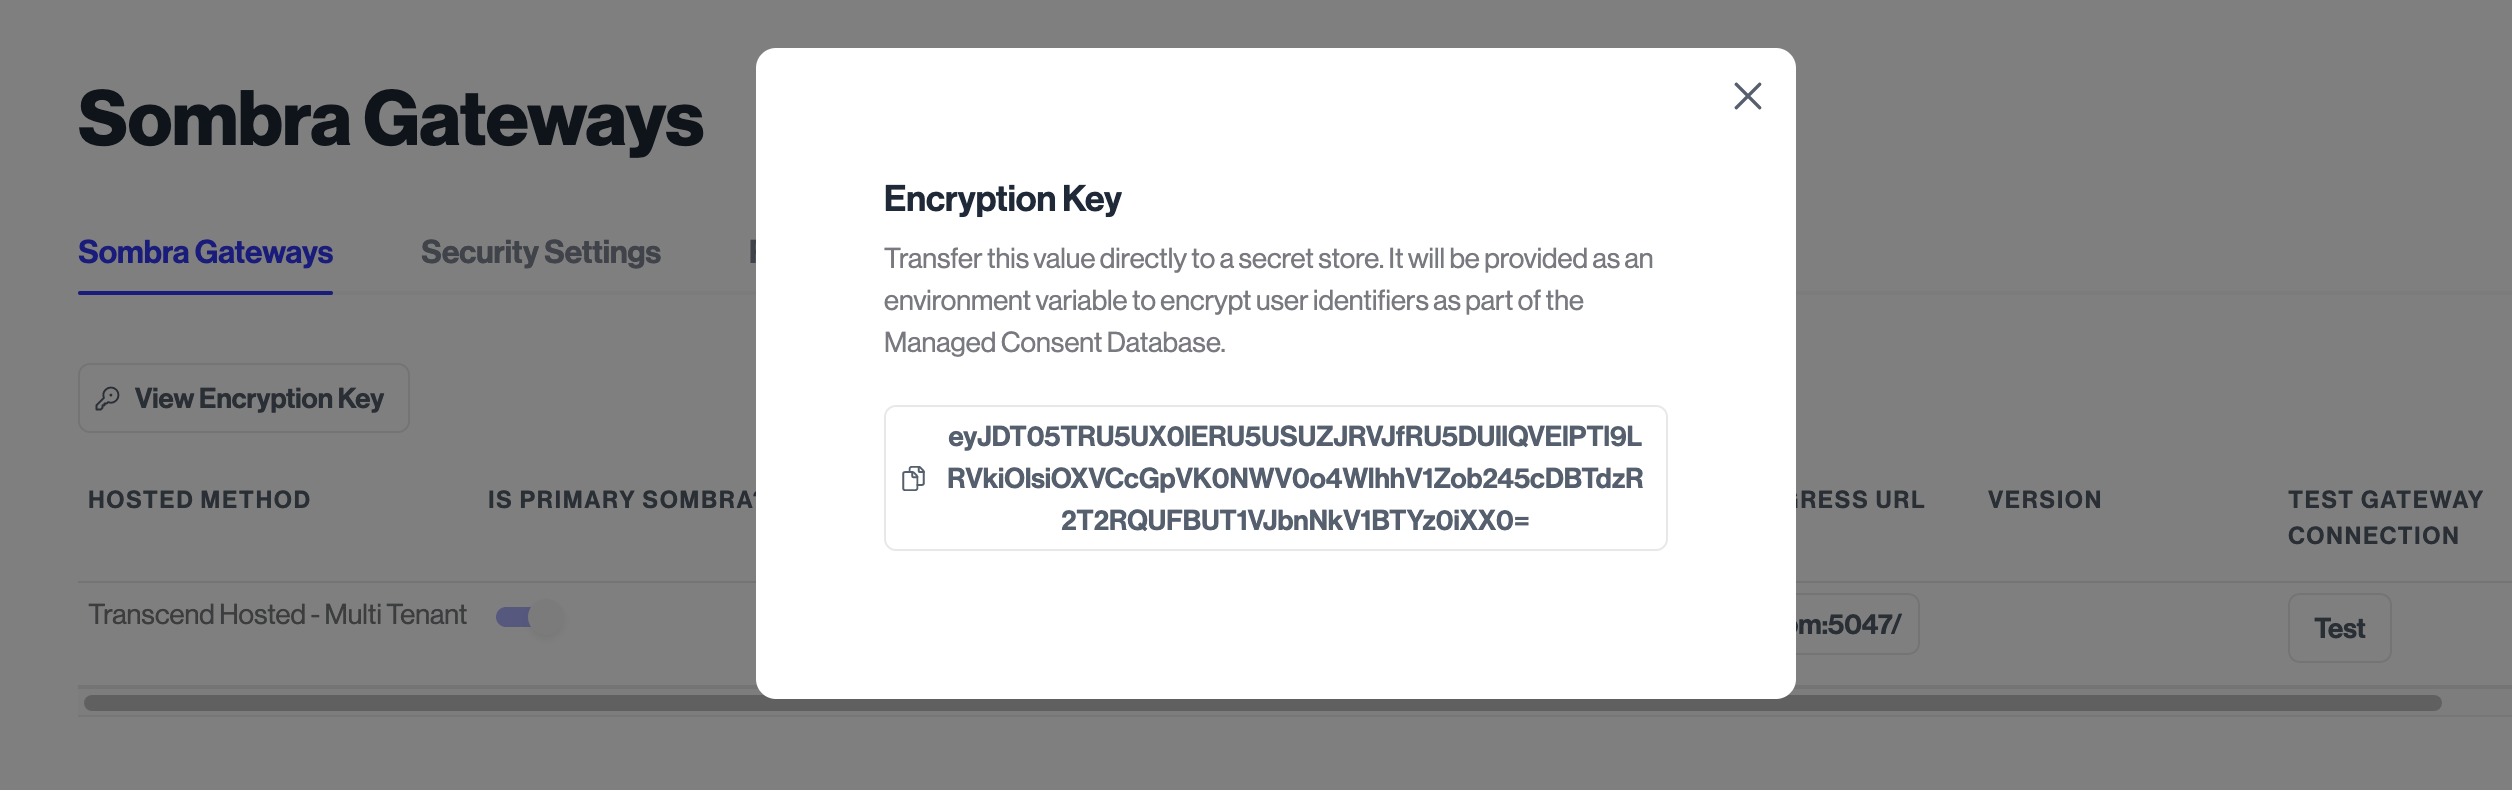 Sombra configuration page in the Admin Dashboard showing an example encryption key